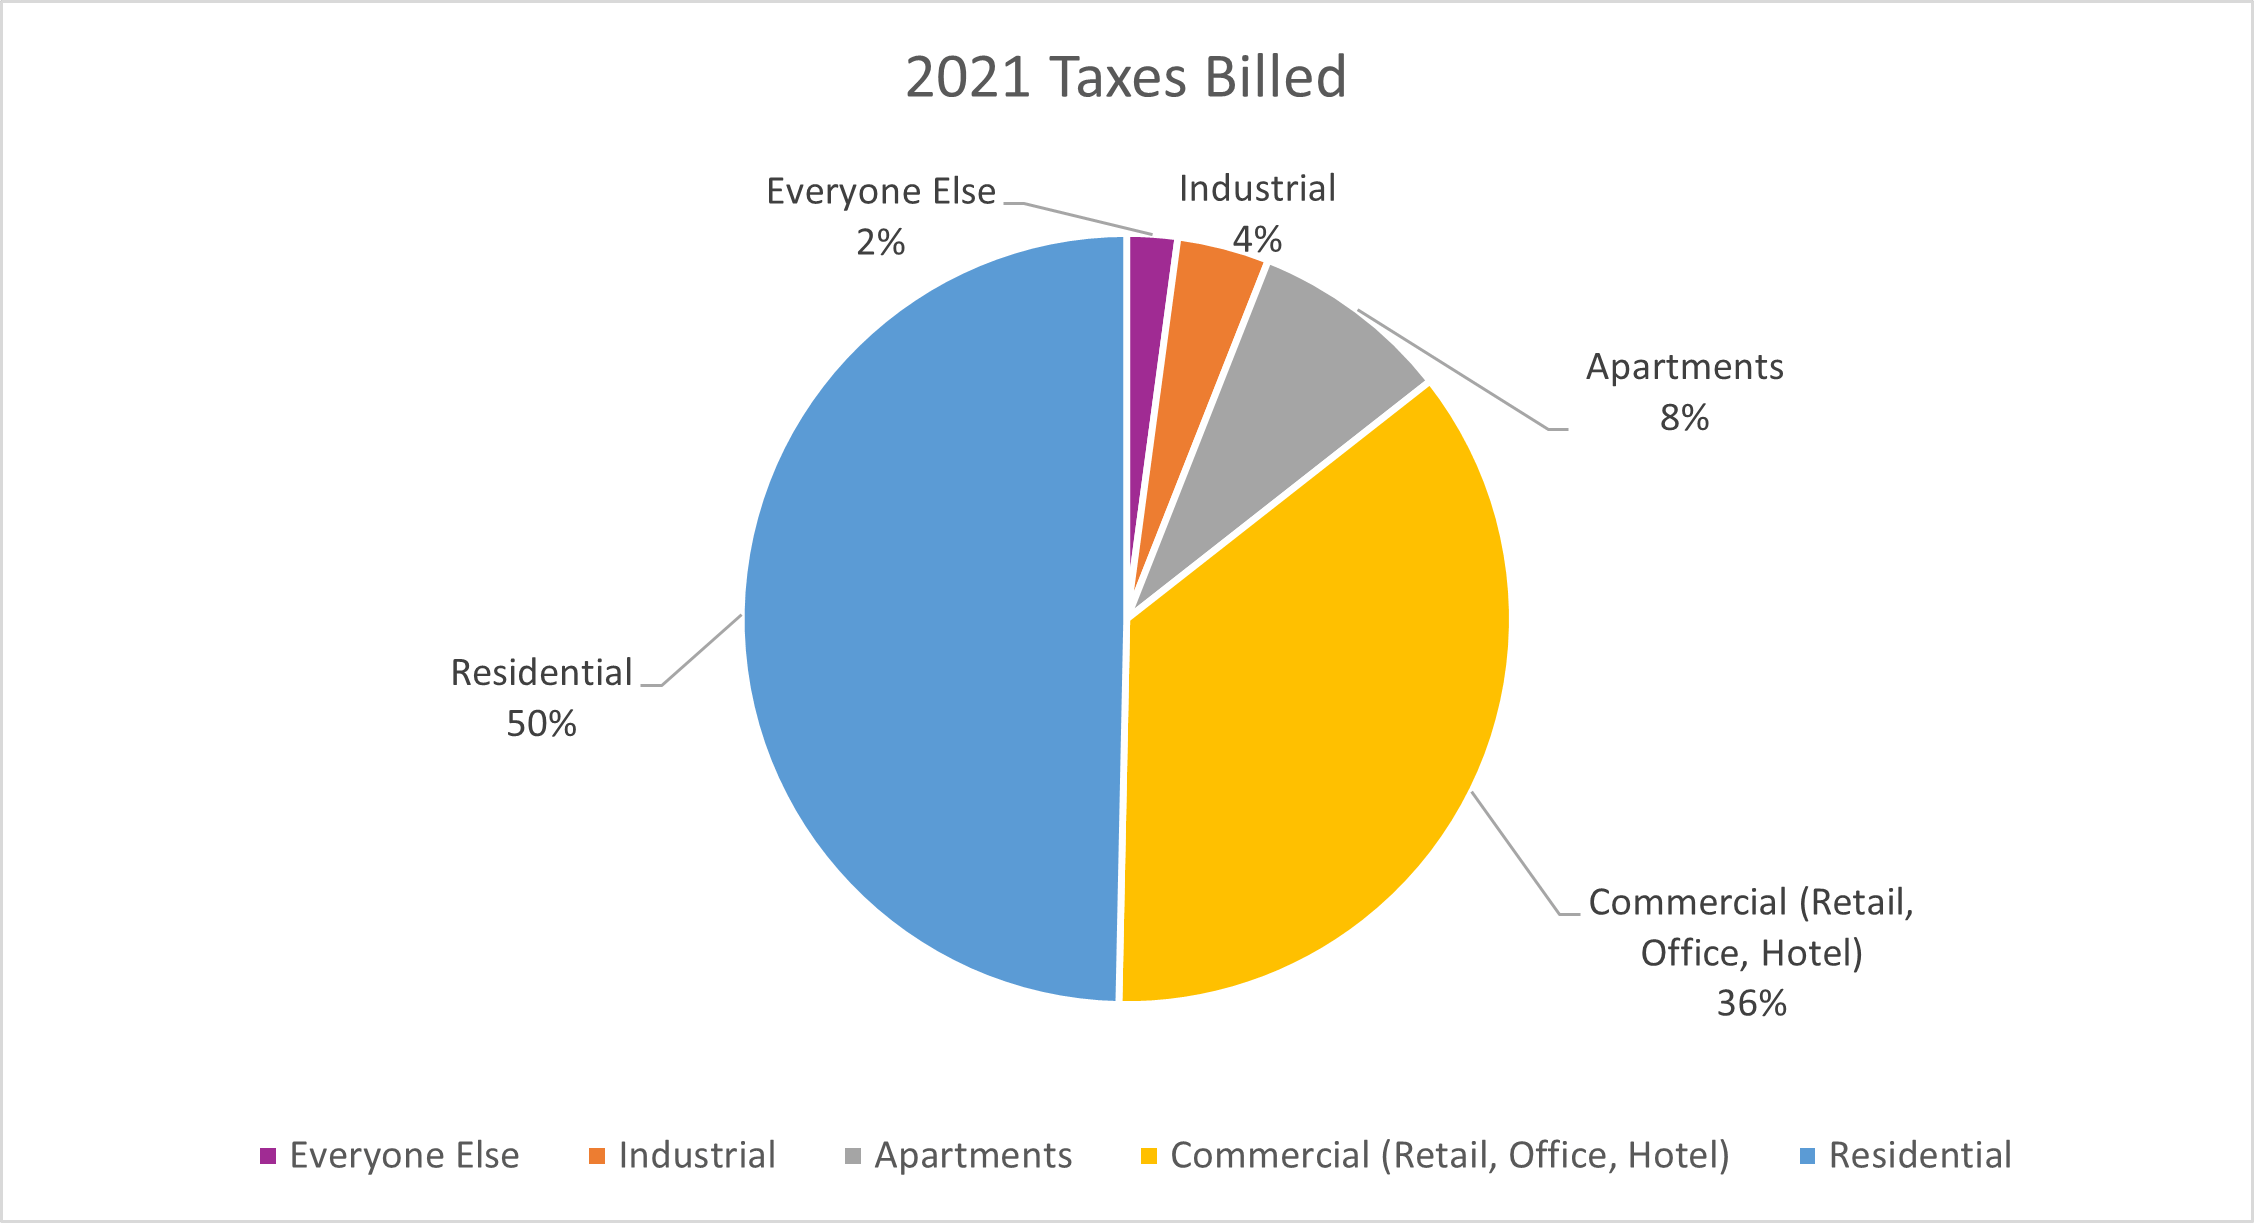 2021 Taxes Billed by Class